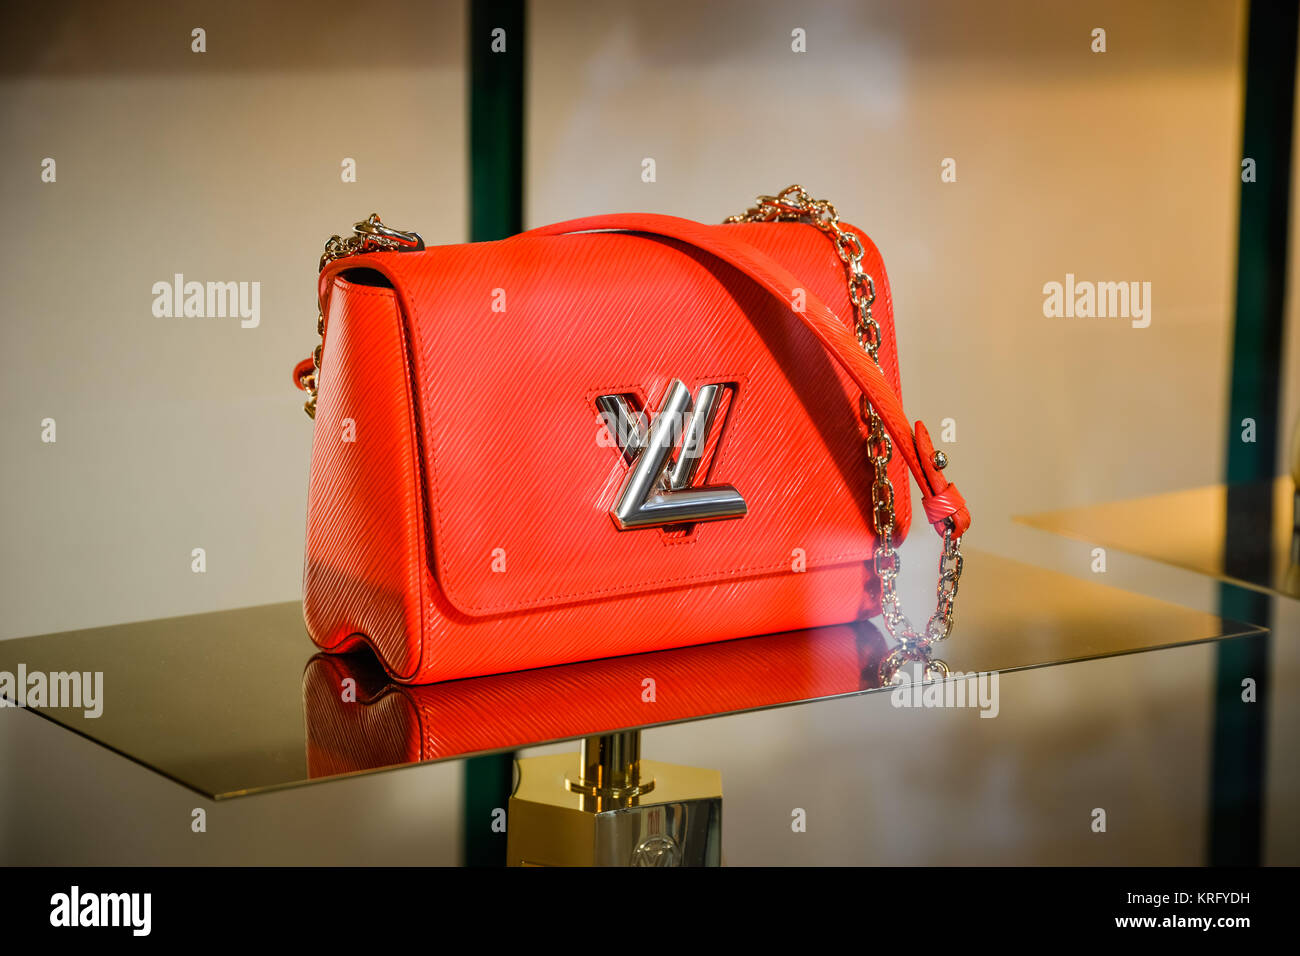 LOUIS VUITTON Luxury Store in the Iconsiam Shopping Mall Editorial  Photography - Image of handbag, glamour: 184683432